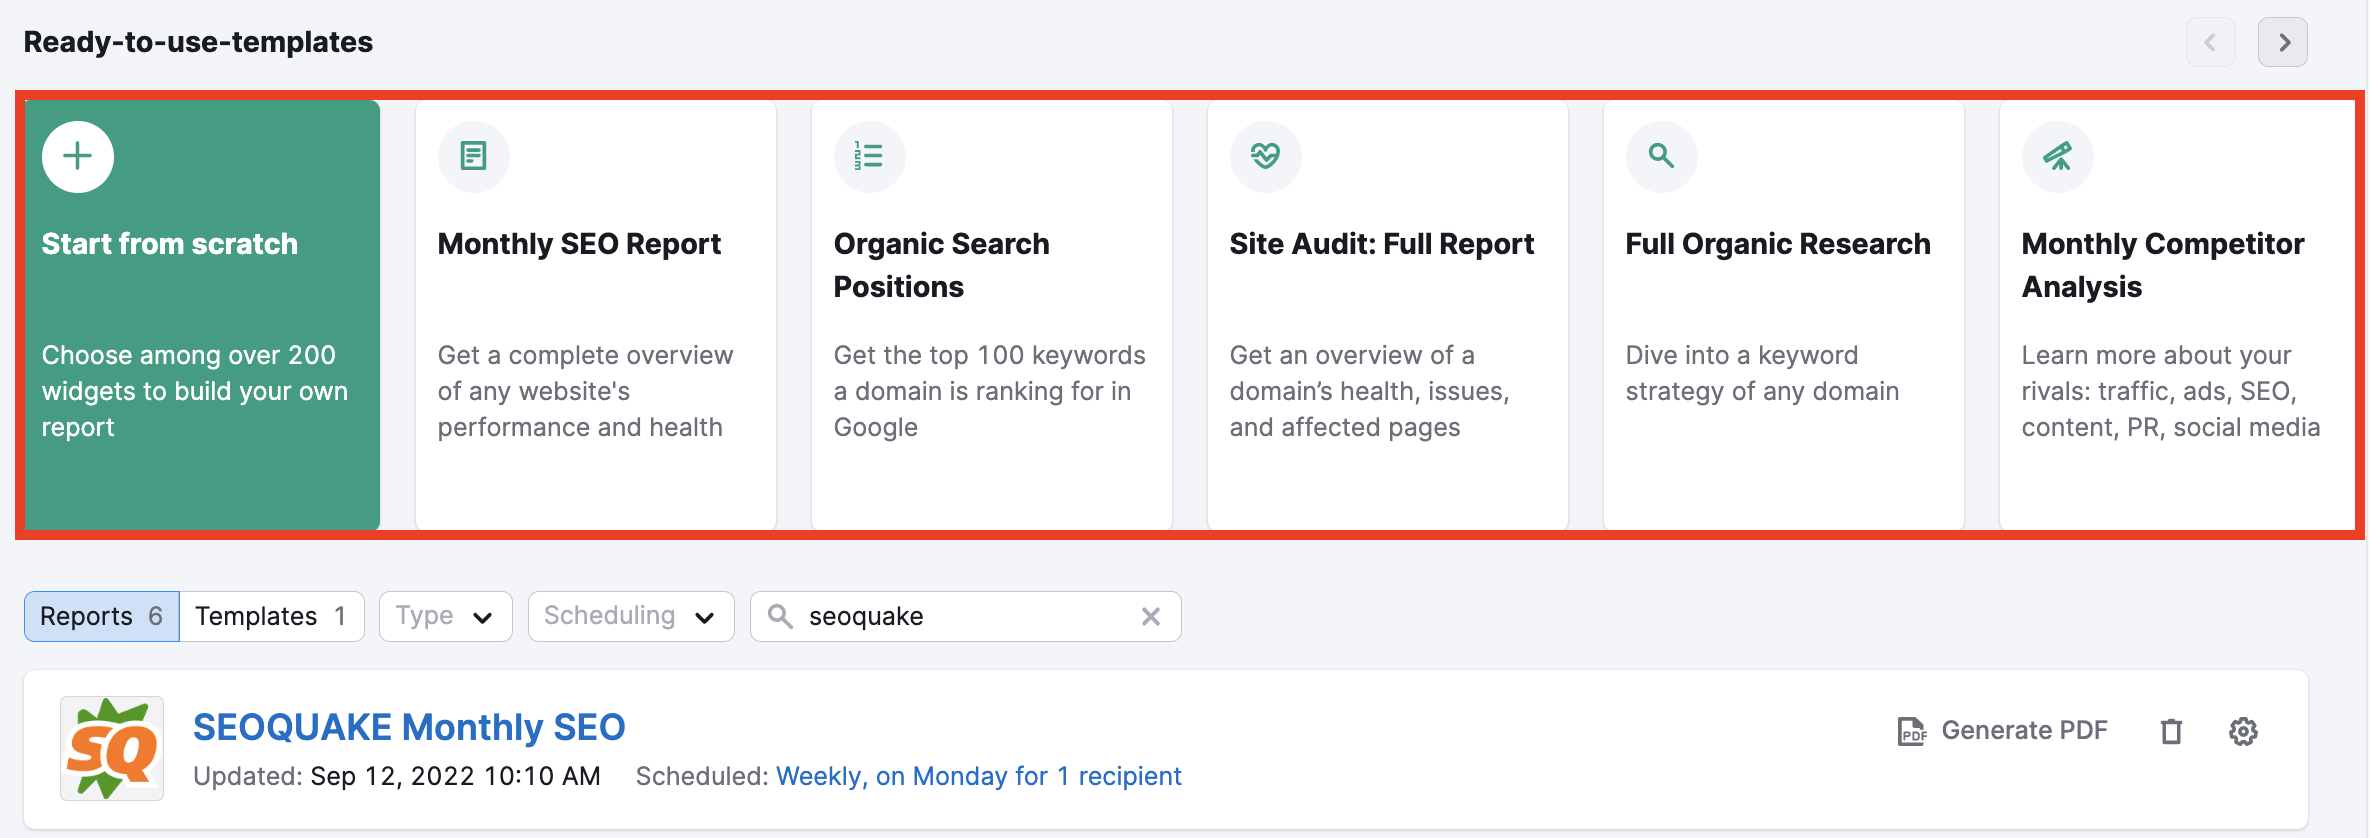 Easy Reporting with Semrush image 5